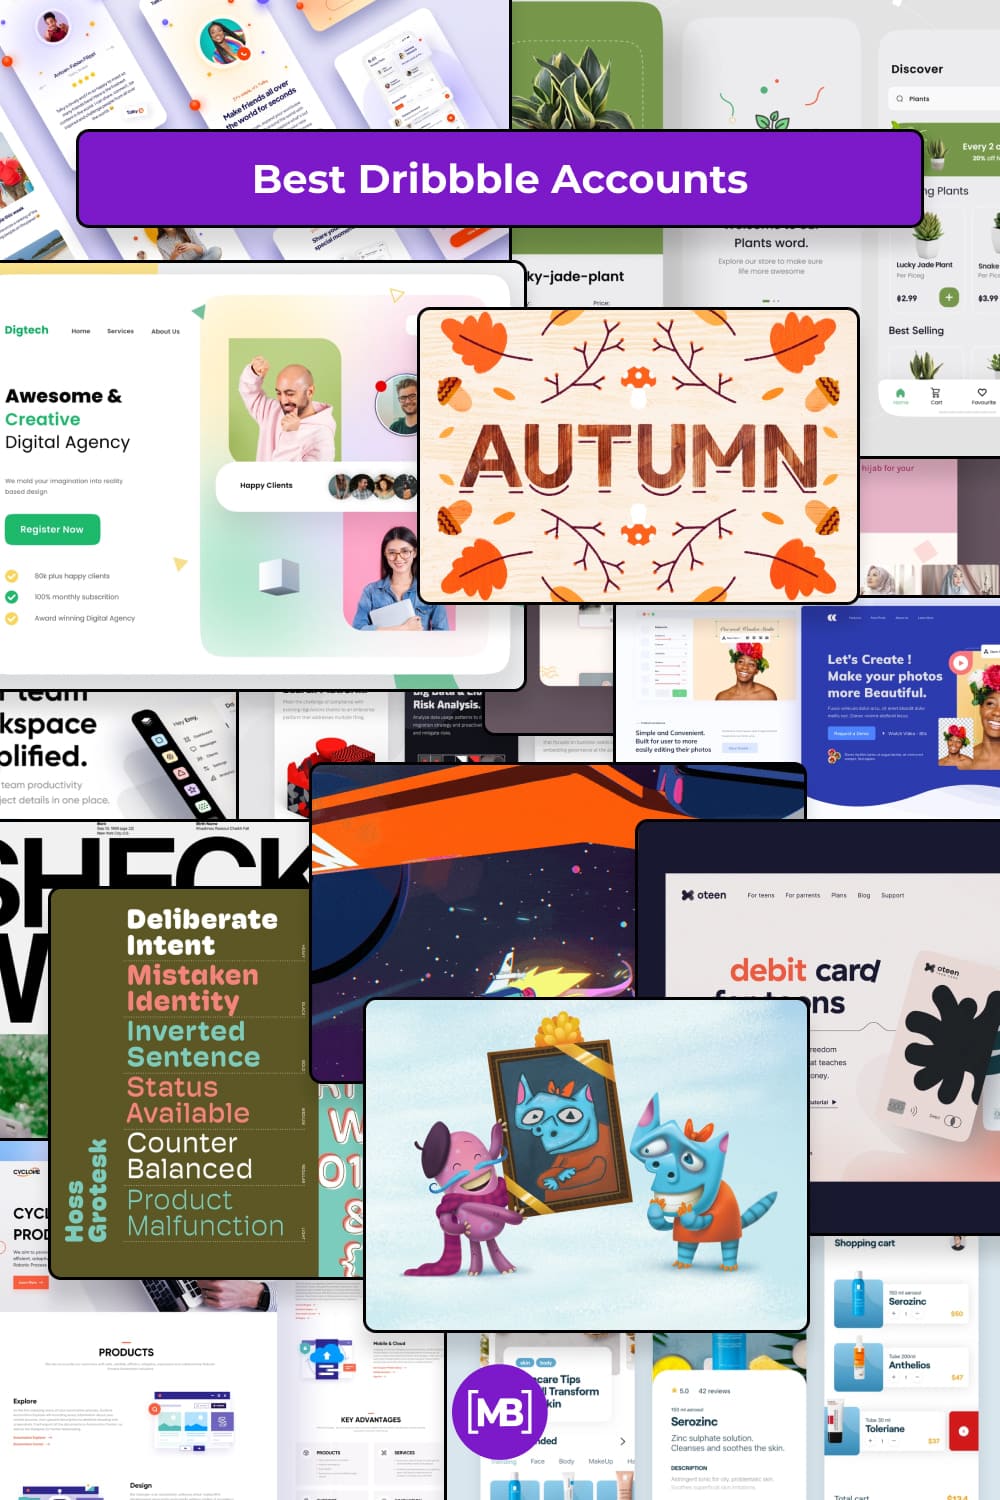 Best Dribbble Accounts Collage for Pinterest.